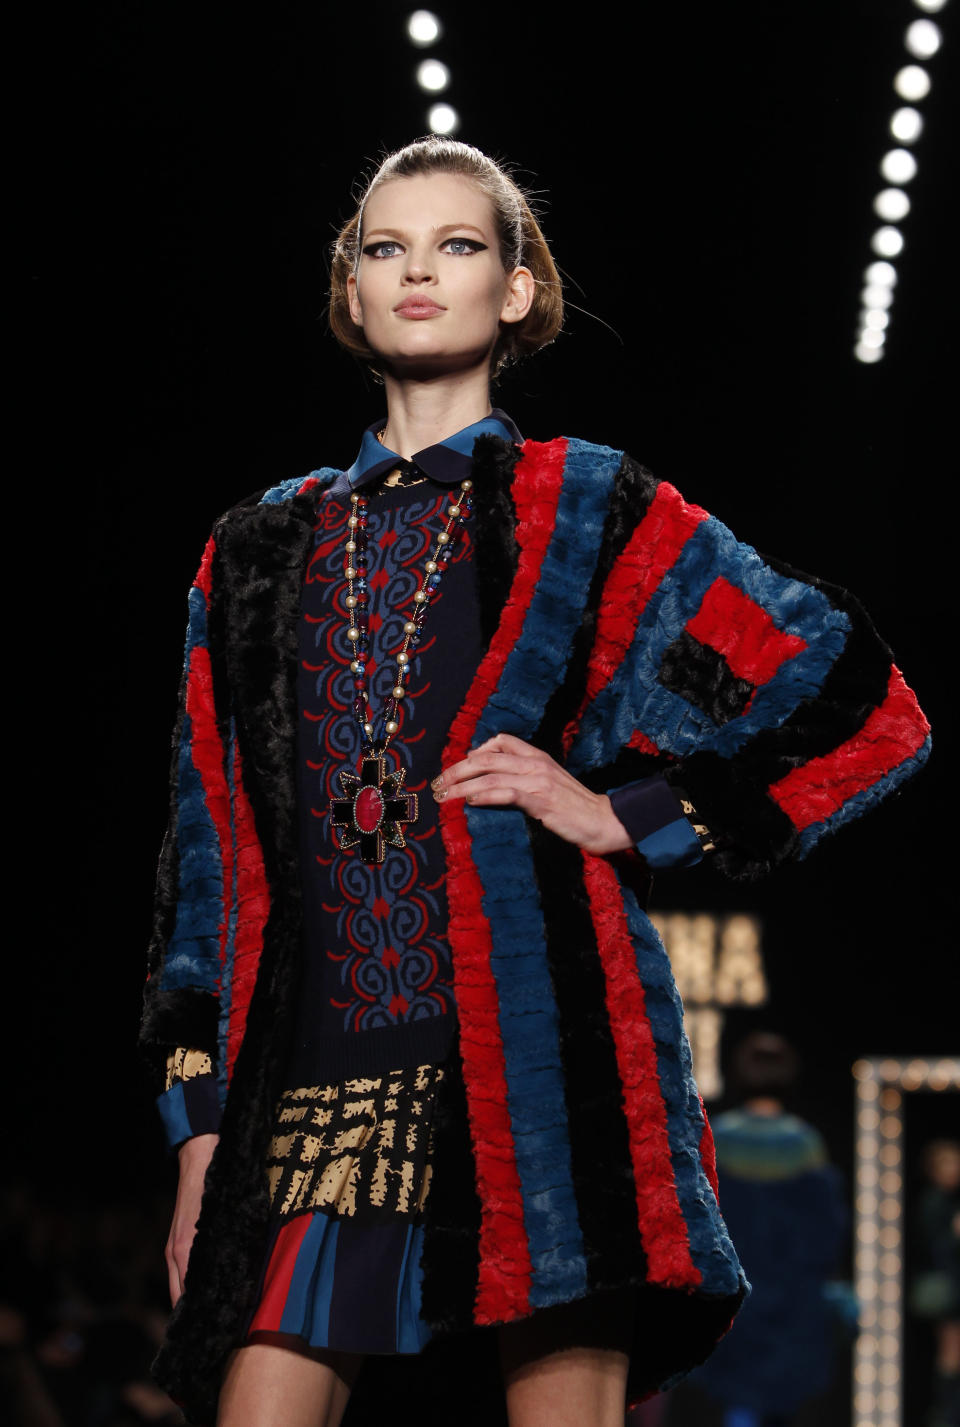 The Anna Sui Fall 2013 collection is modeled during Fashion Week, Wednesday, Feb. 13, 2013 in New York. (AP Photo/Jason DeCrow)